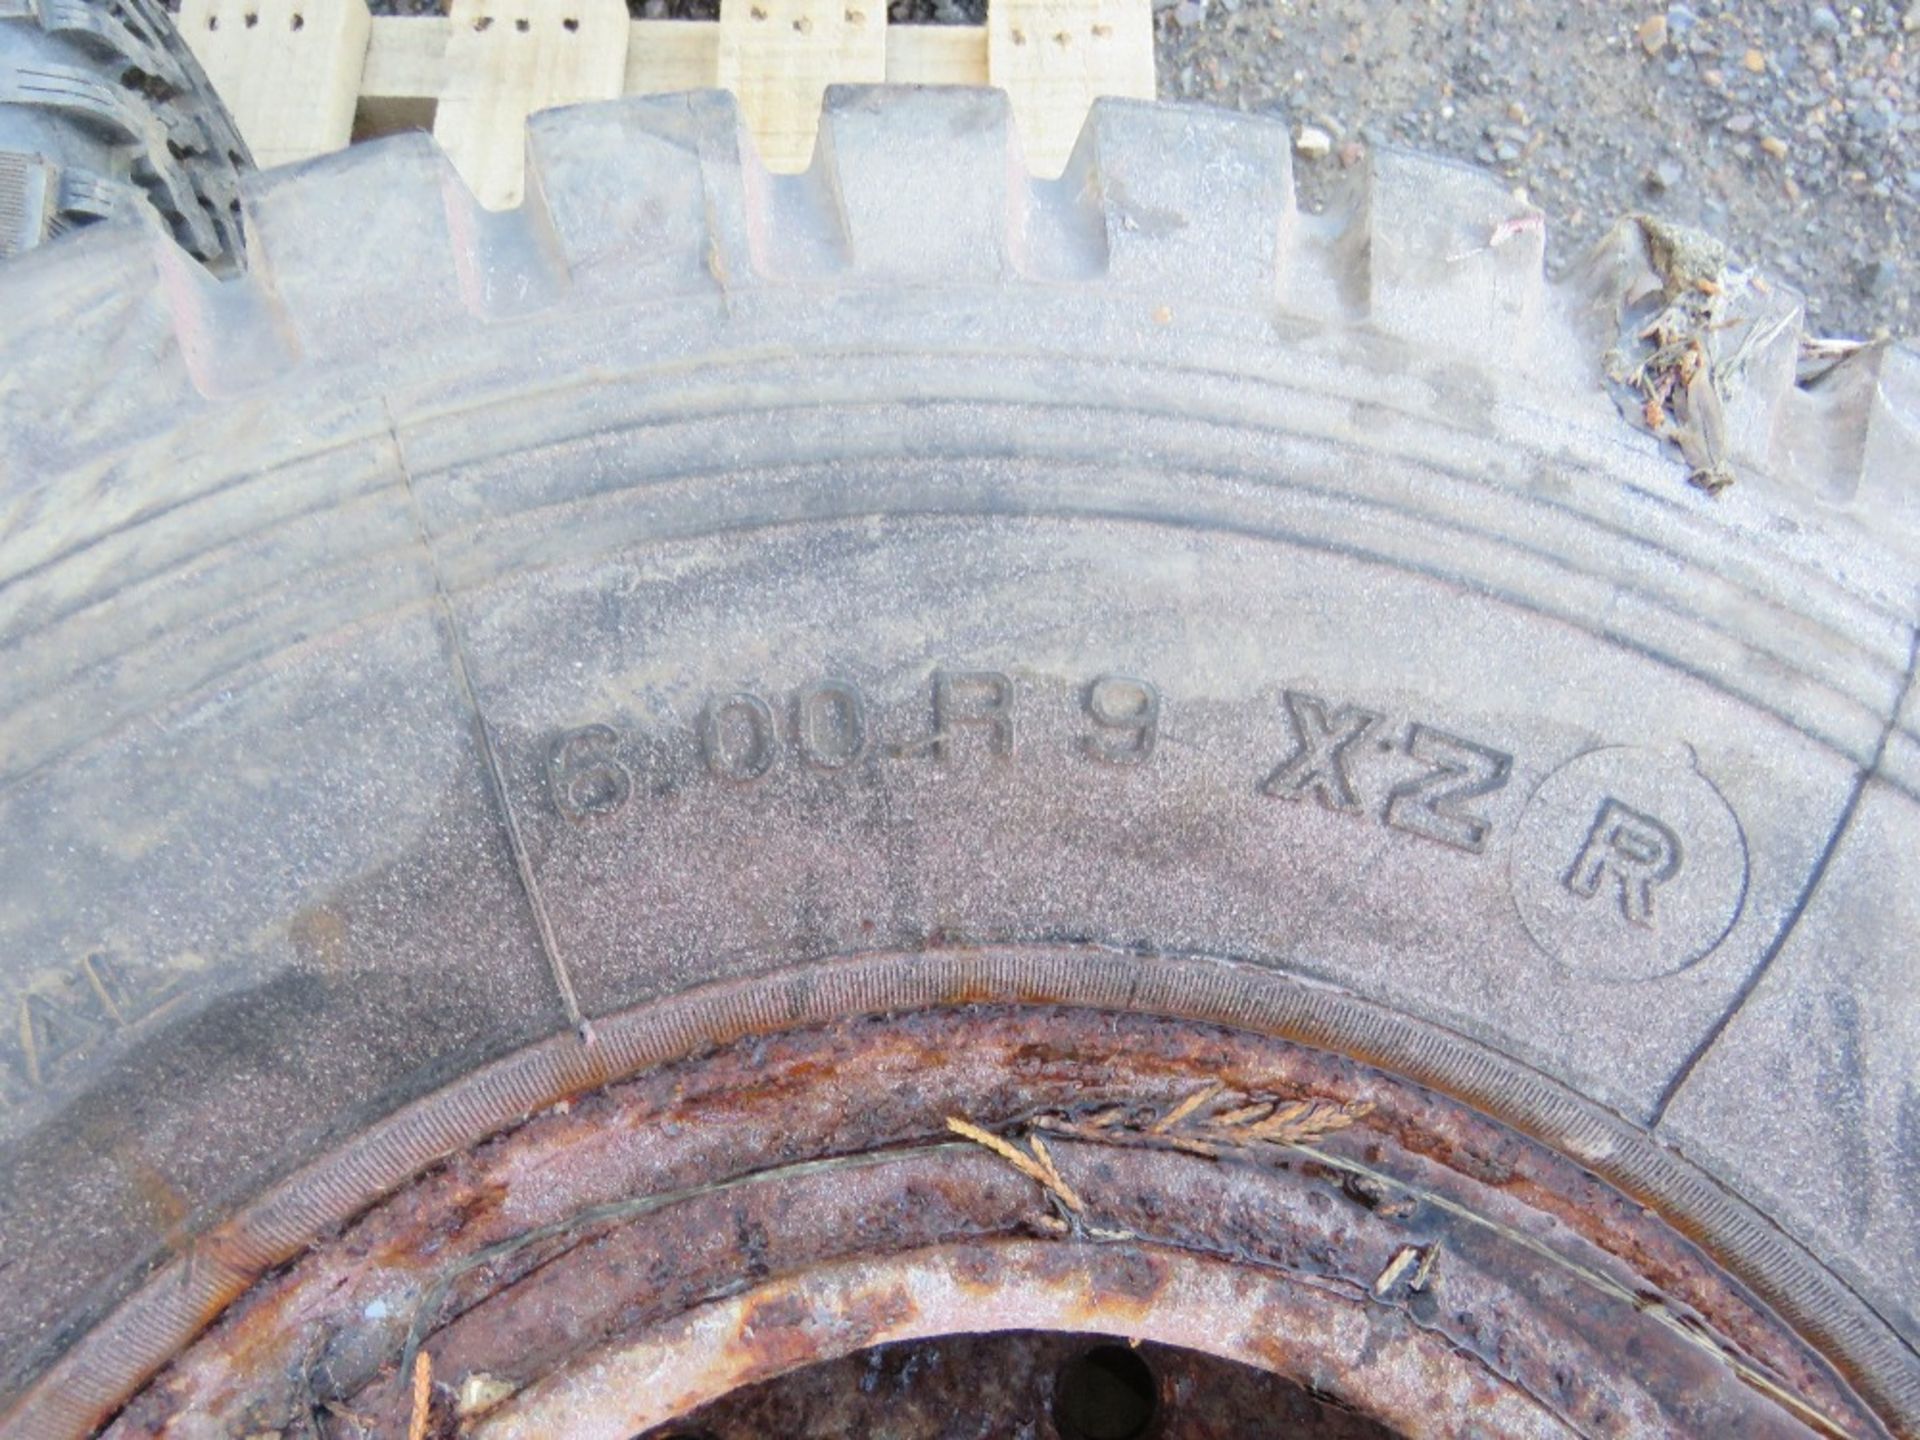 3 X TRAILER WHEELS AND TYRES. - Image 3 of 4